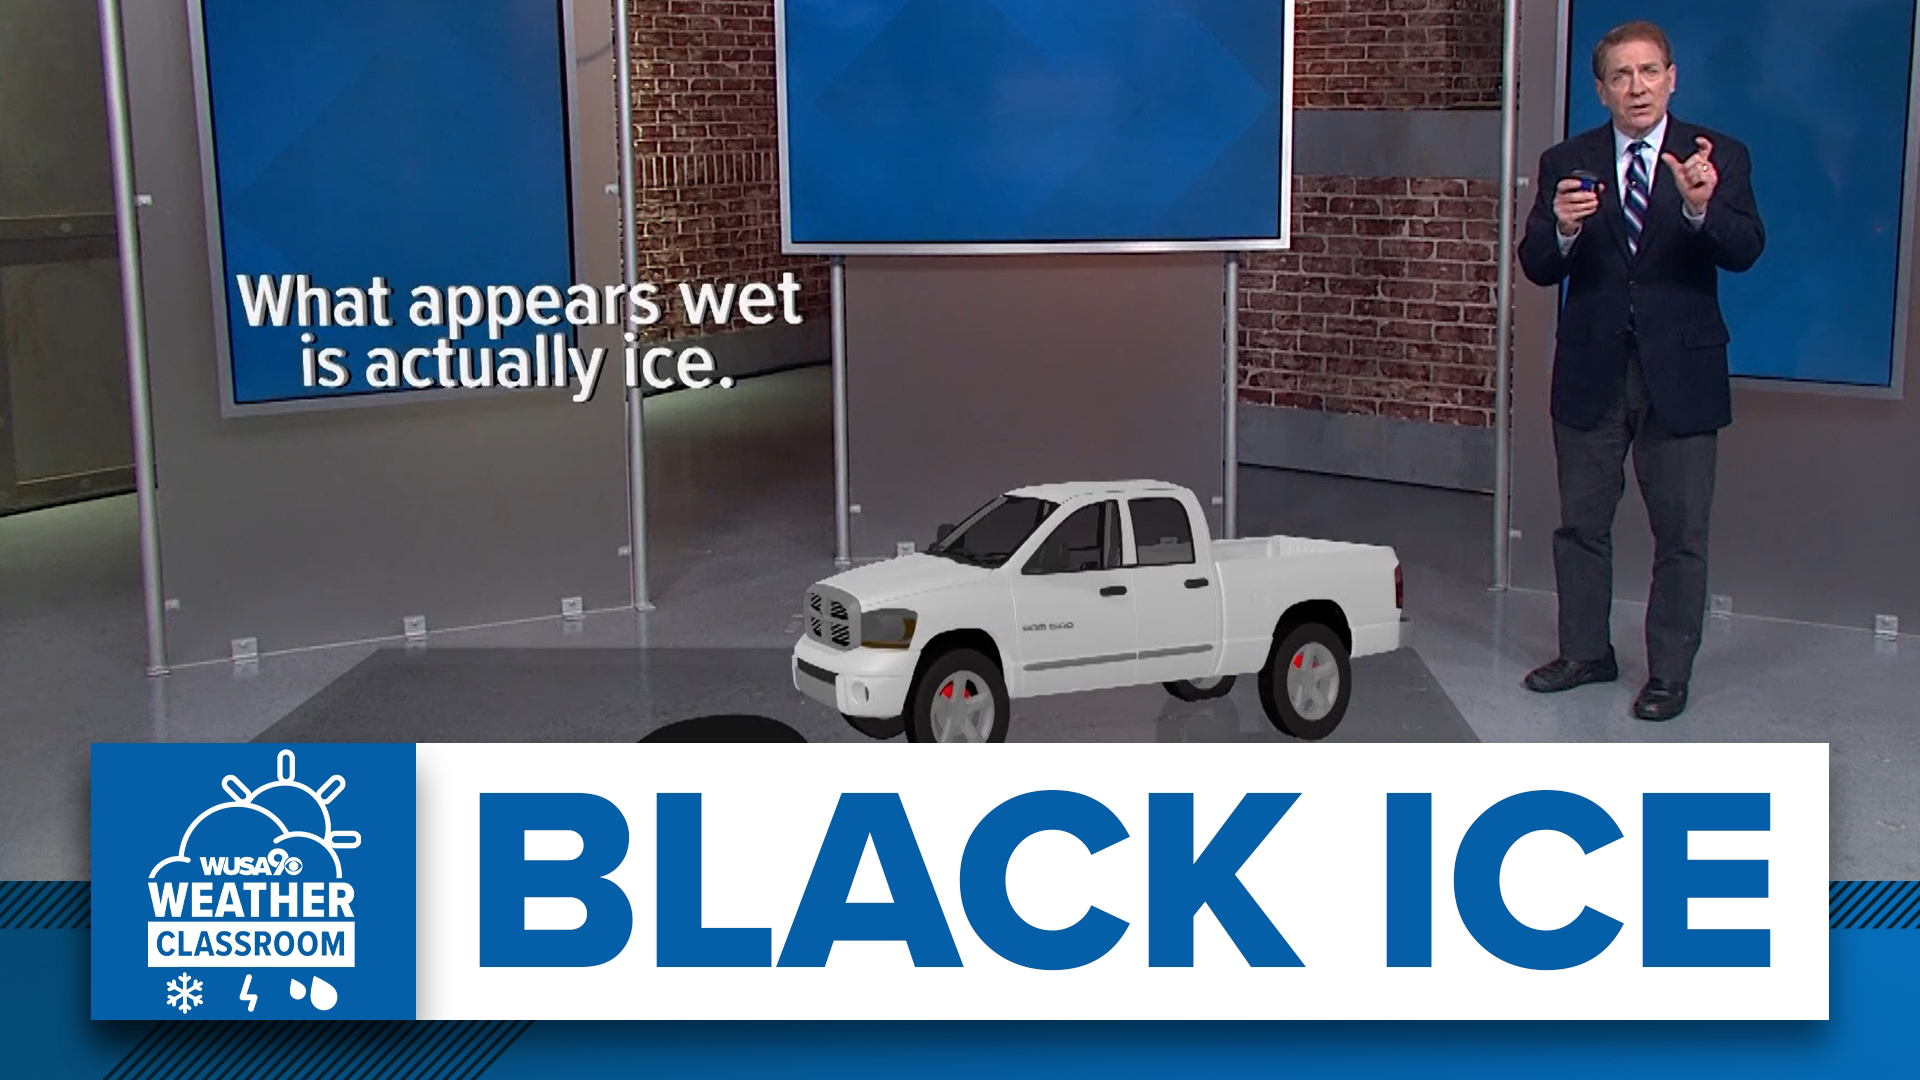 Meteorologist Topper Shutt outlines the basics of black ice, and what you can do to avoid it.